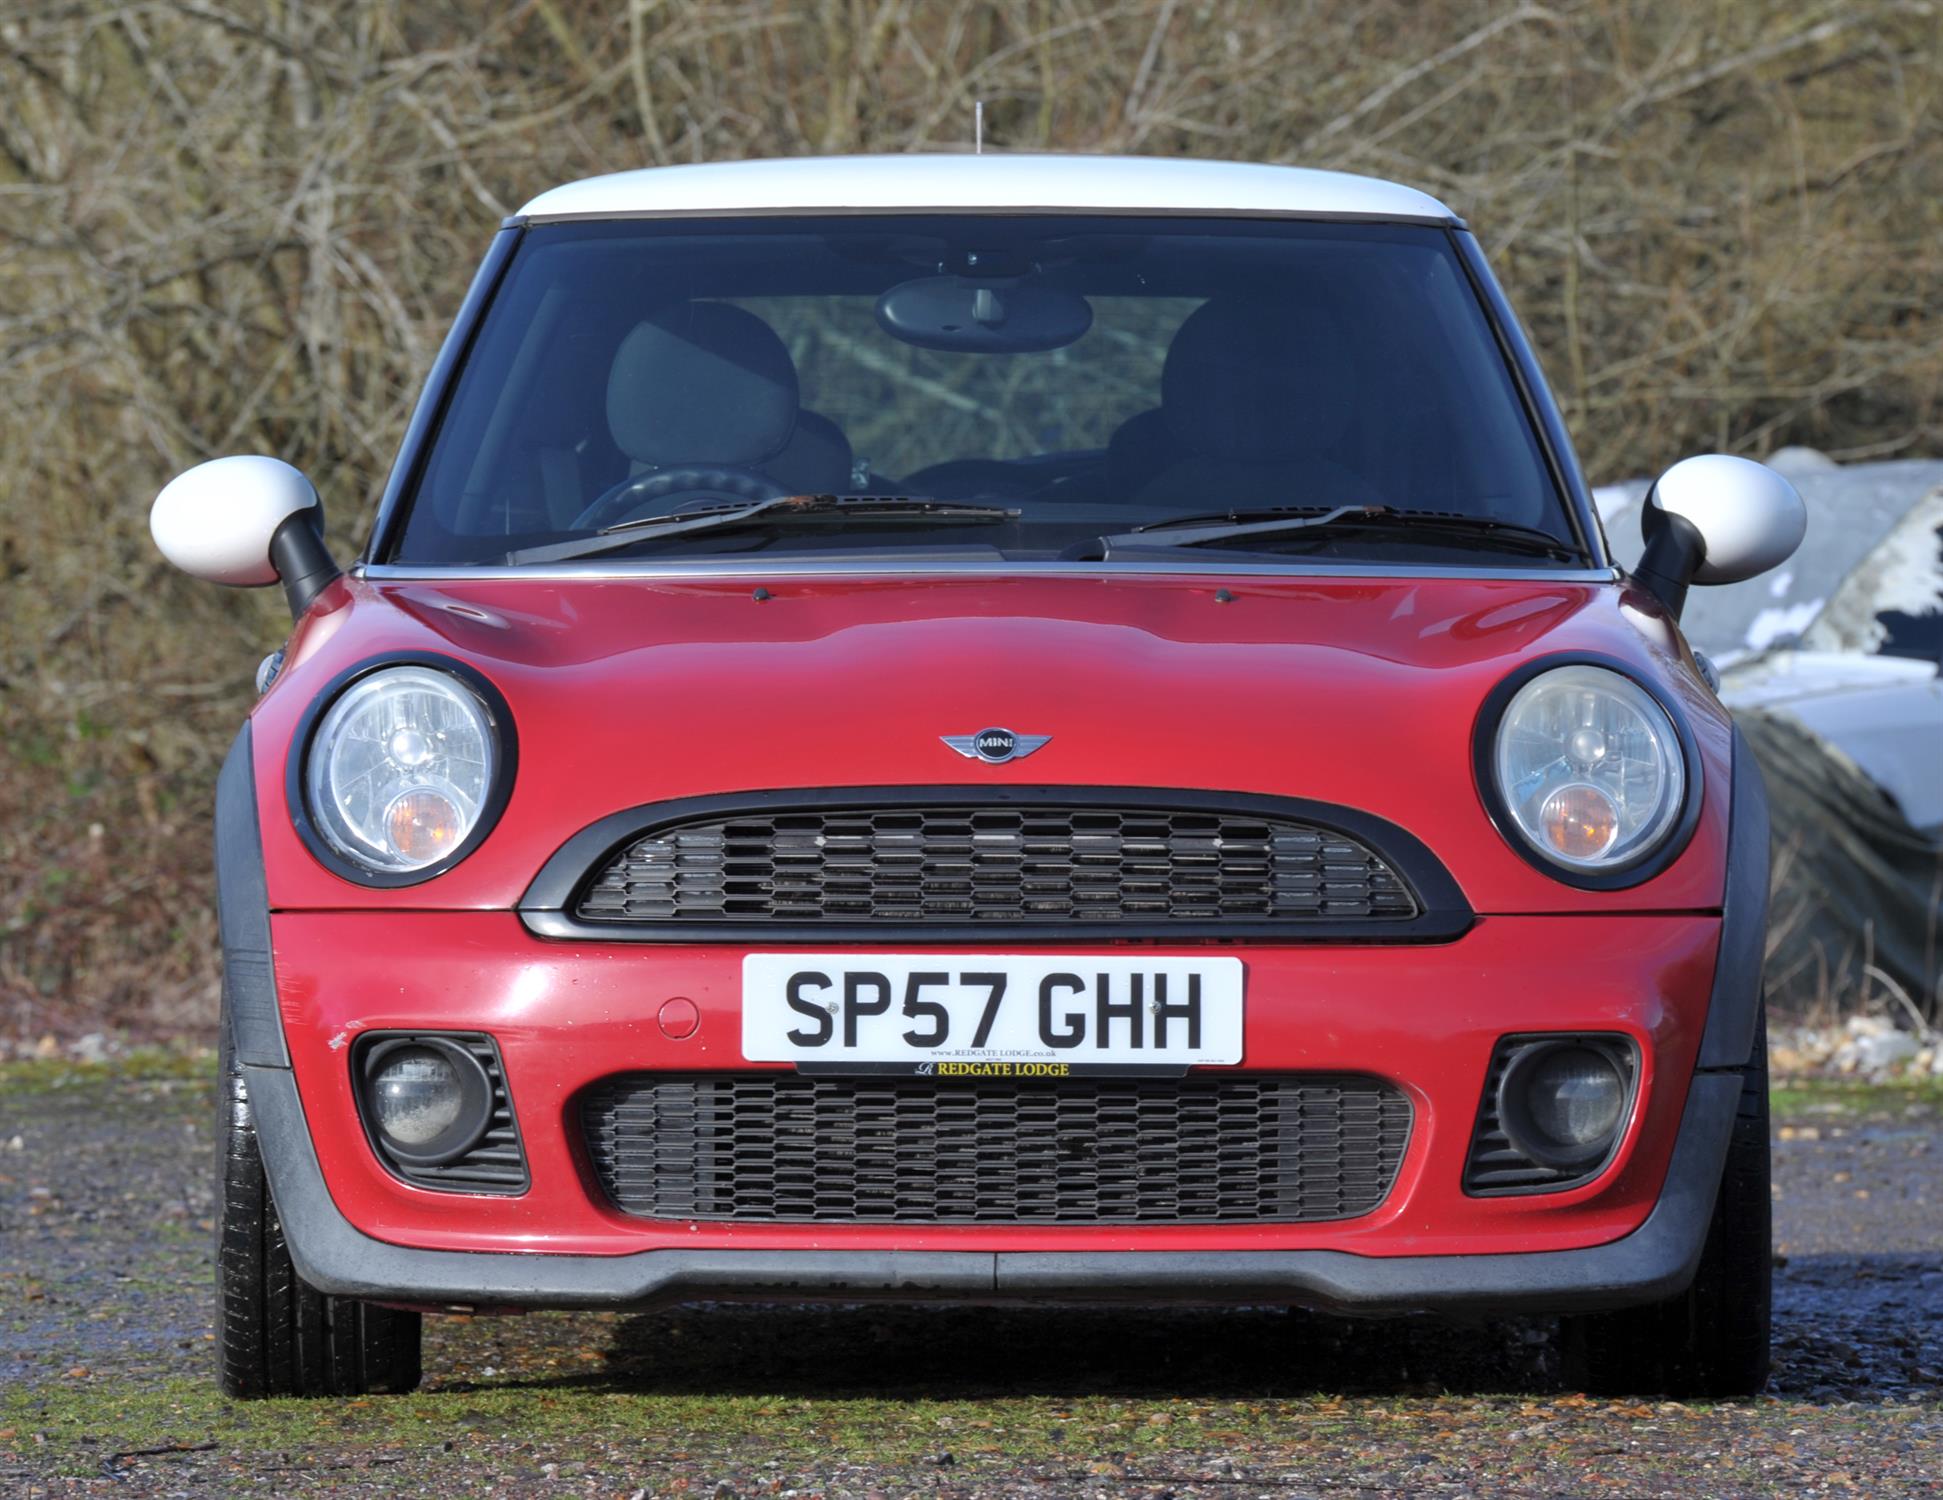 2007 Mini 1.6 Cooper Petrol with John Cooper Works Areo Body Kit. Registration number: SP57 GHH. - Image 2 of 14